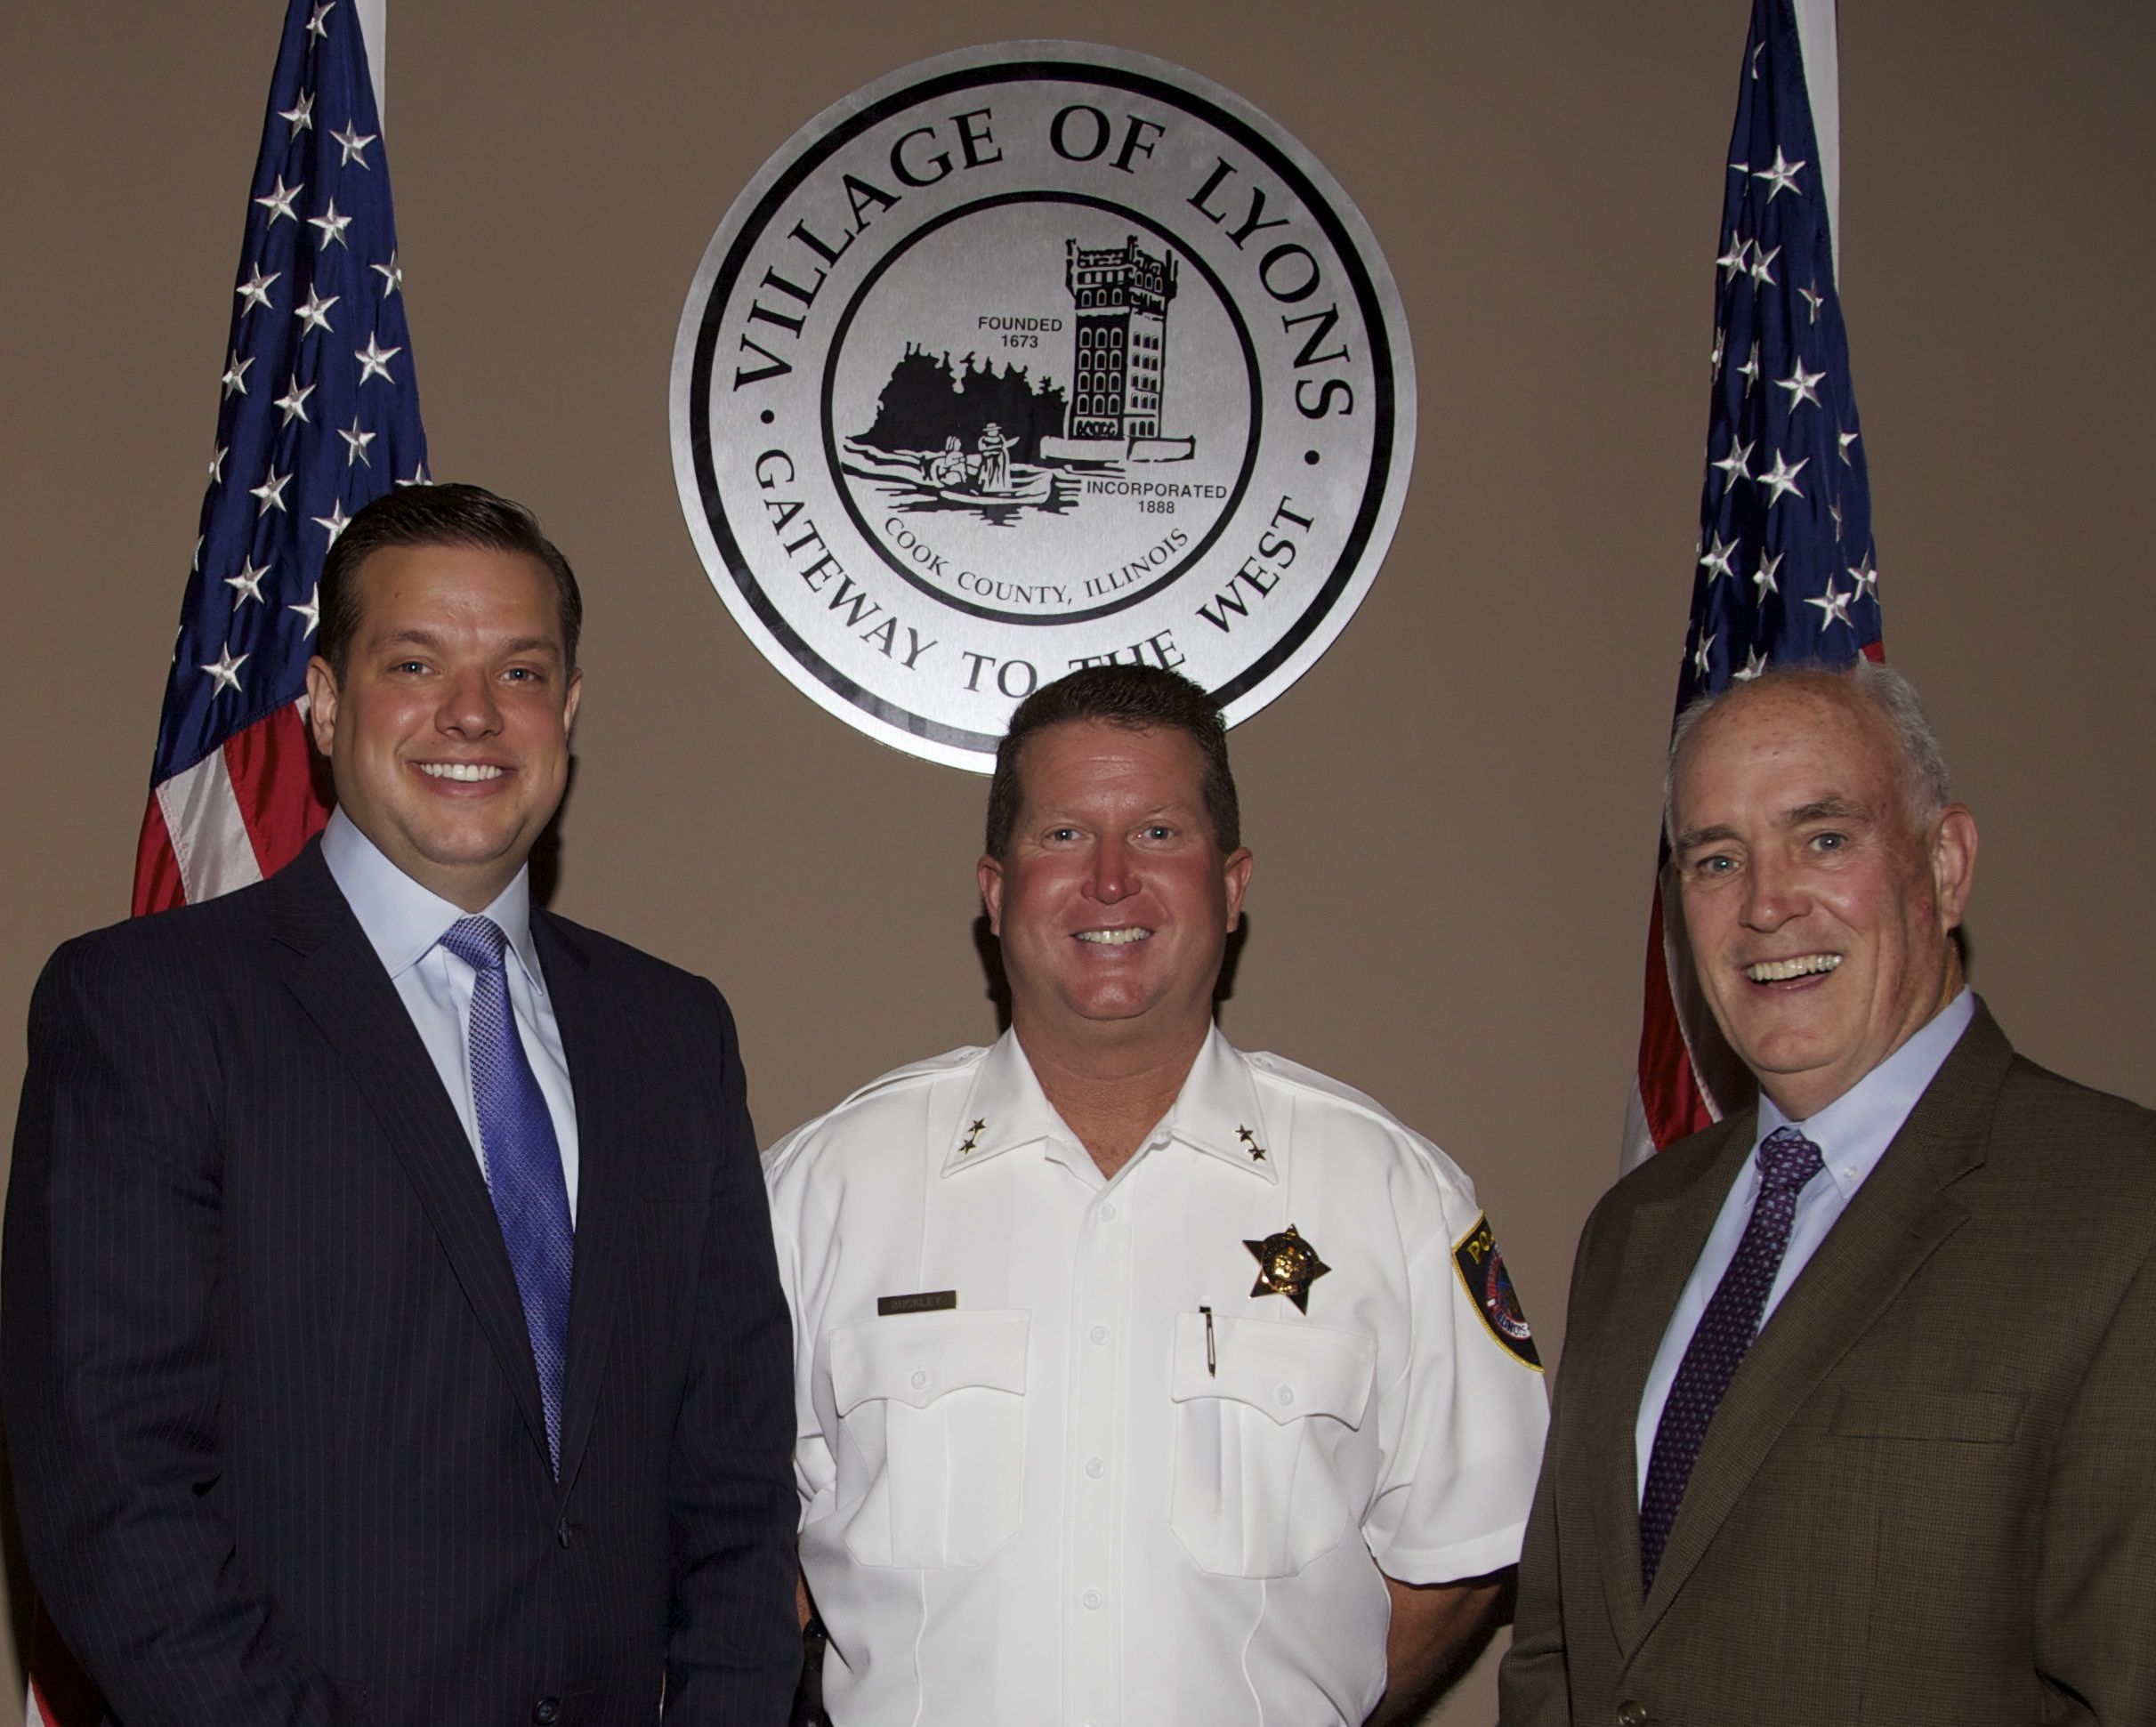 Lyons police officer promoted to Deputy Chief